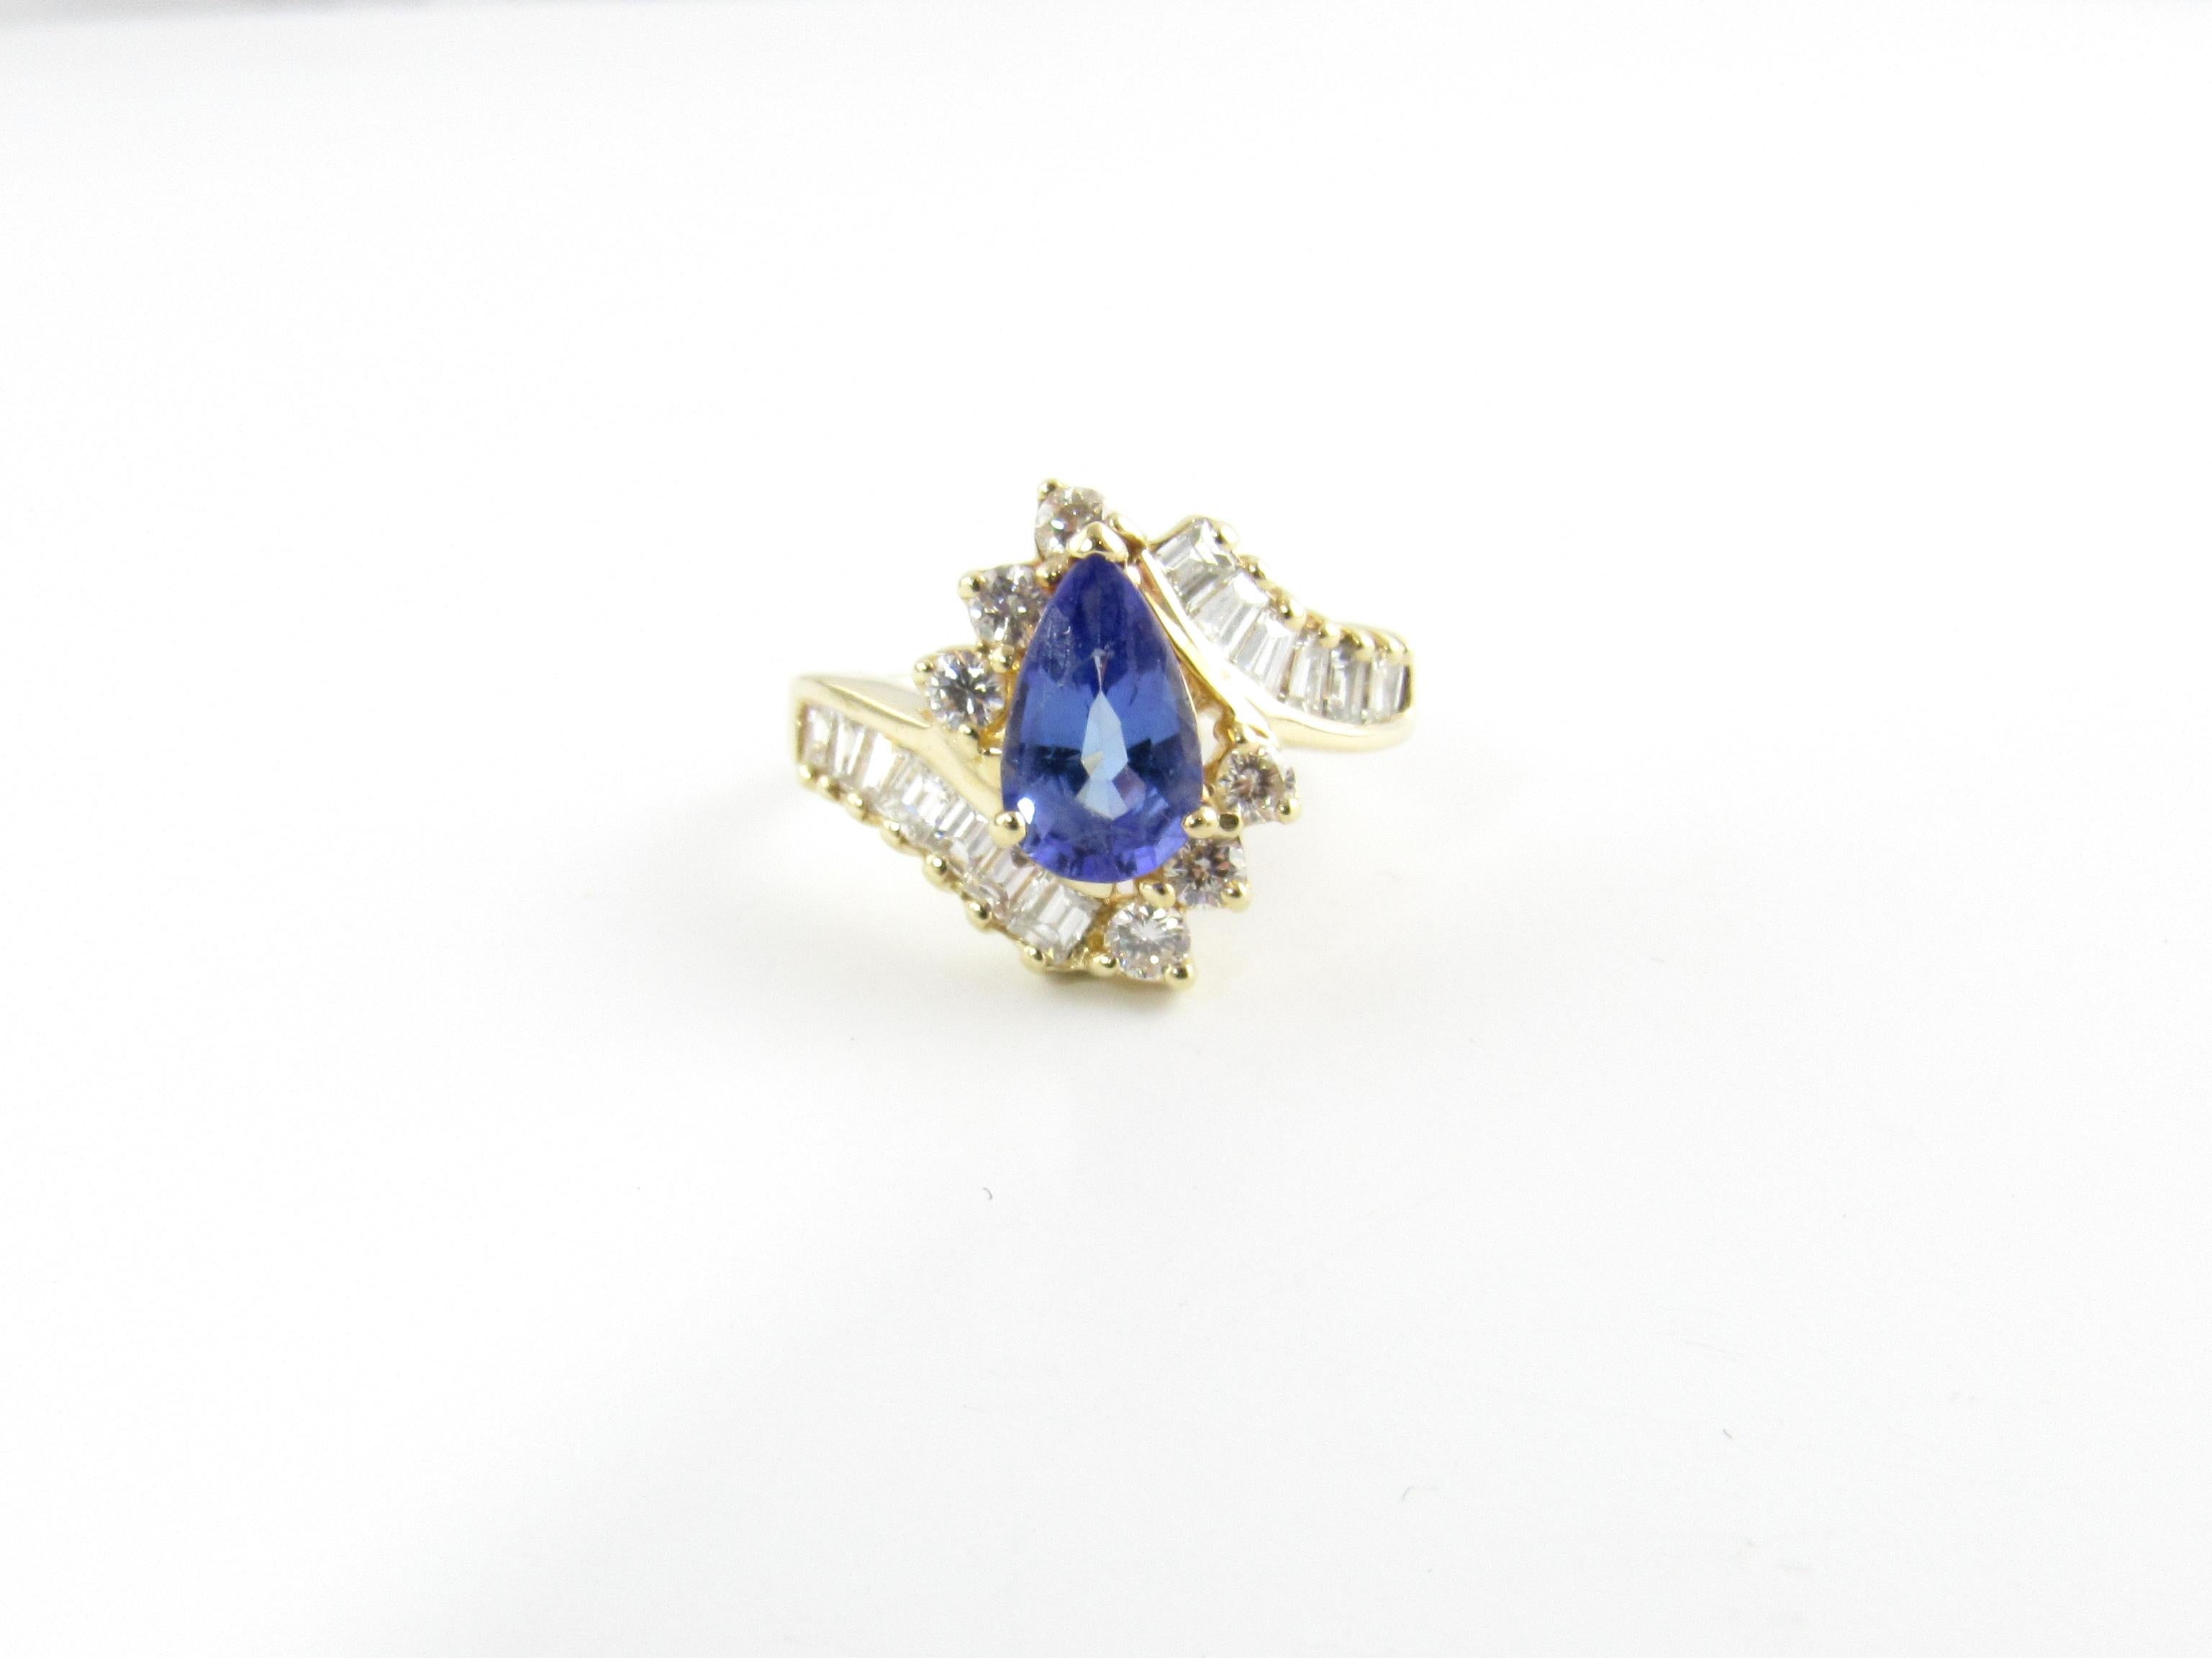 14 Karat Yellow Gold Tanzanite and Diamond Ring Size 6

This stunning ring features one pear-shaped tanzanite (10 mm x 6 mm), six baguette diamonds (1.10 TCW) and six round brilliant cut diamonds (.24 TCW) set in beautifully detailed 14K yellow